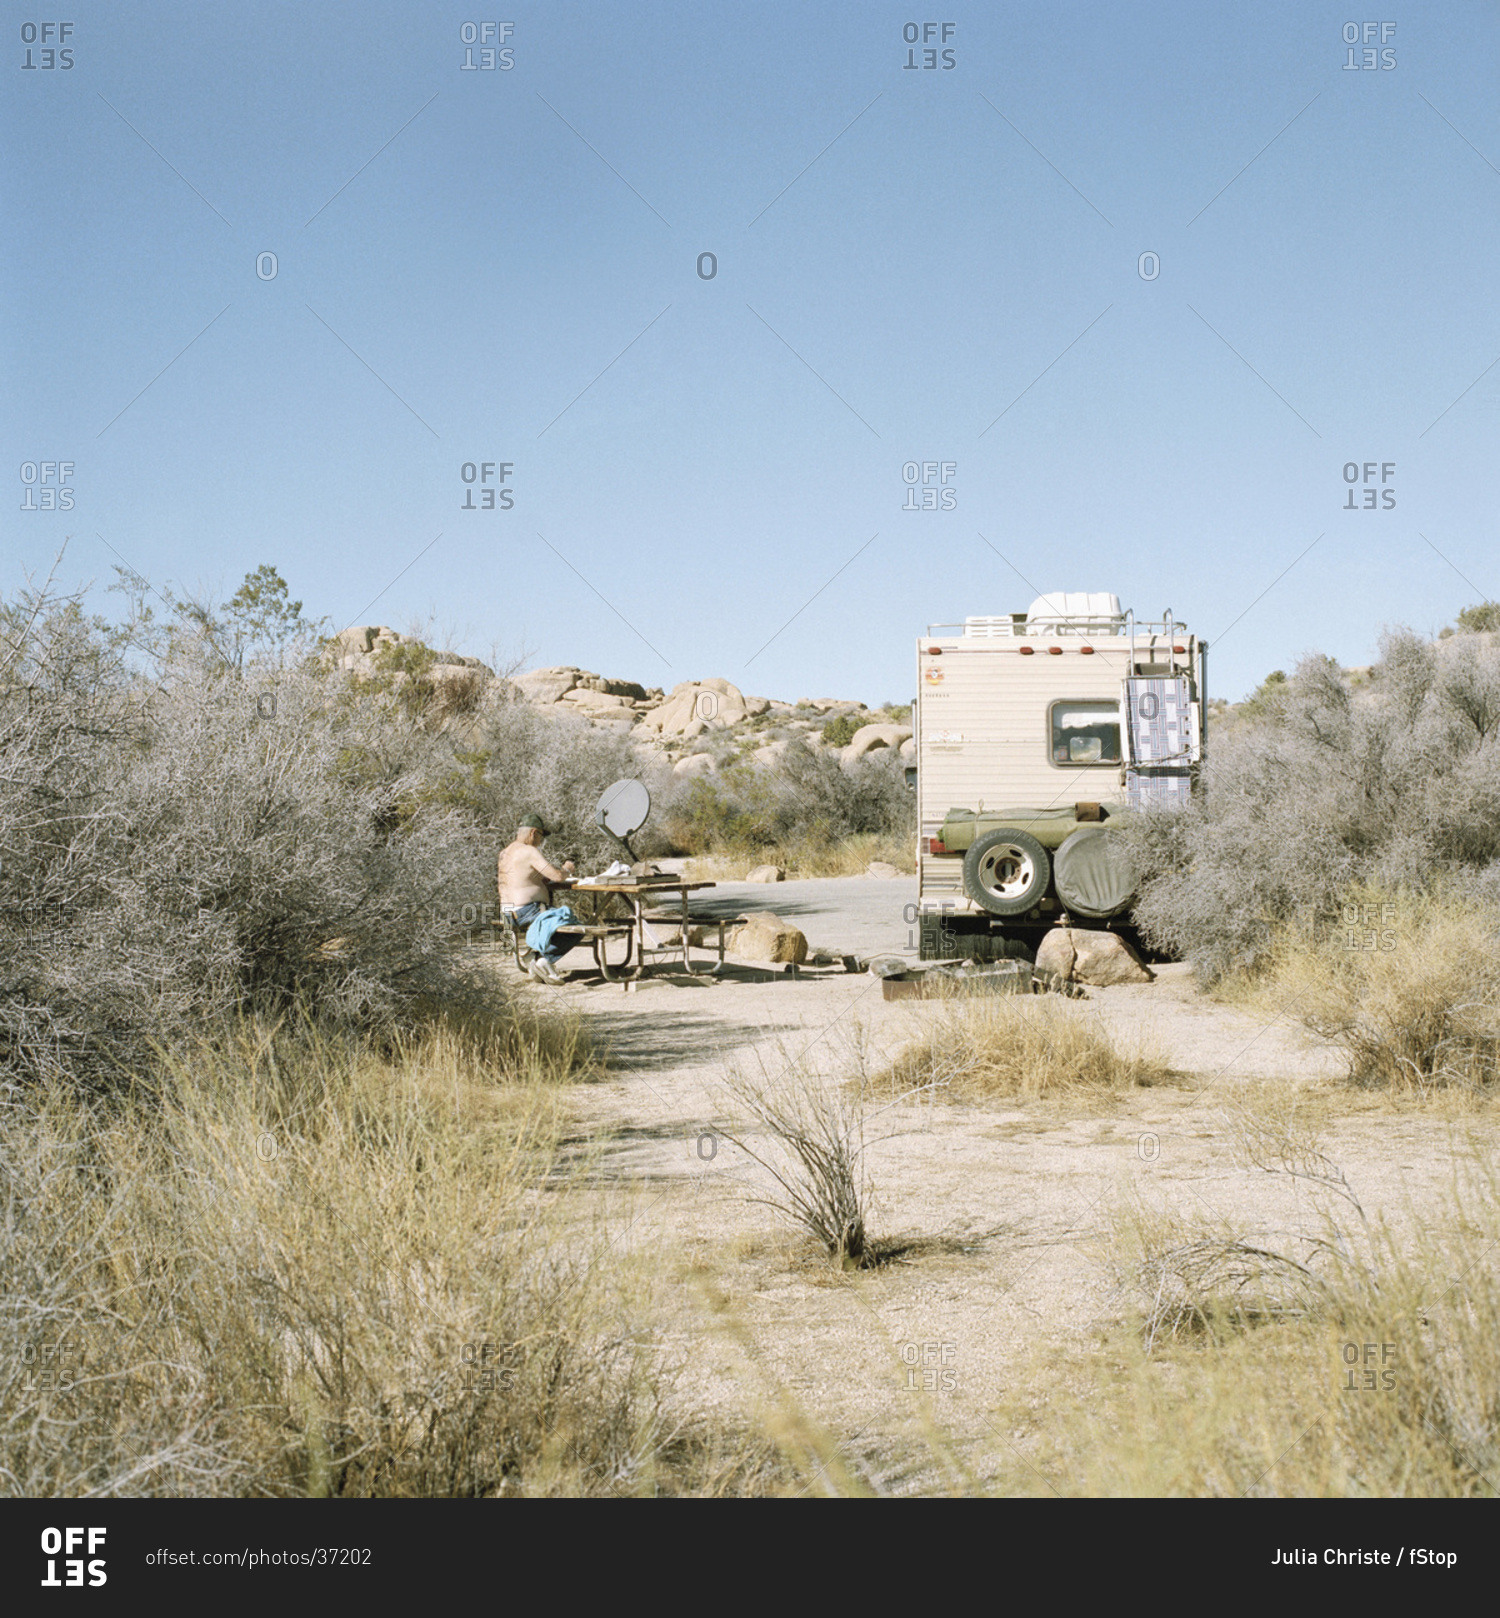 Camper at rest stop with mobile home, Joshua Tree National Park, USA